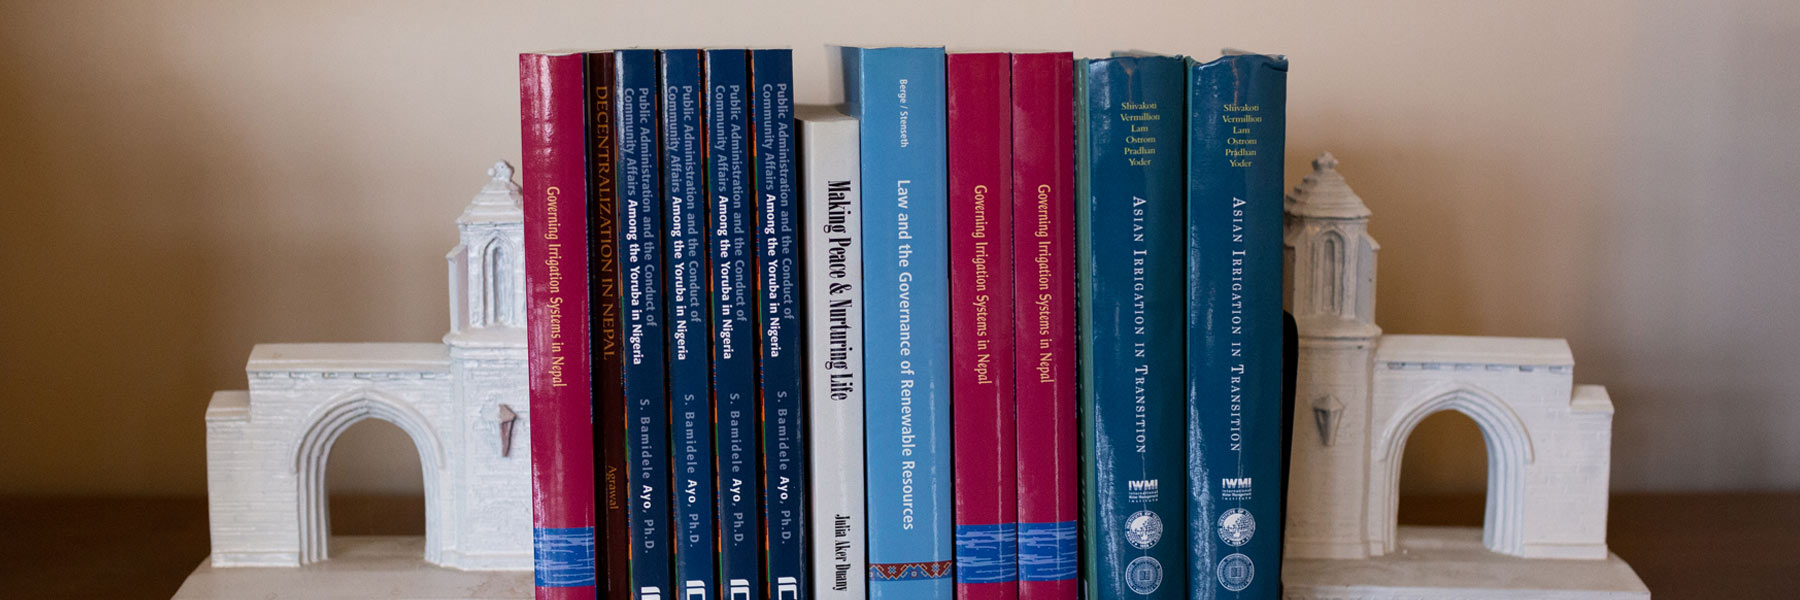 A stack of attractive red and blue books supported by cast bookends of IU's Sample Gates